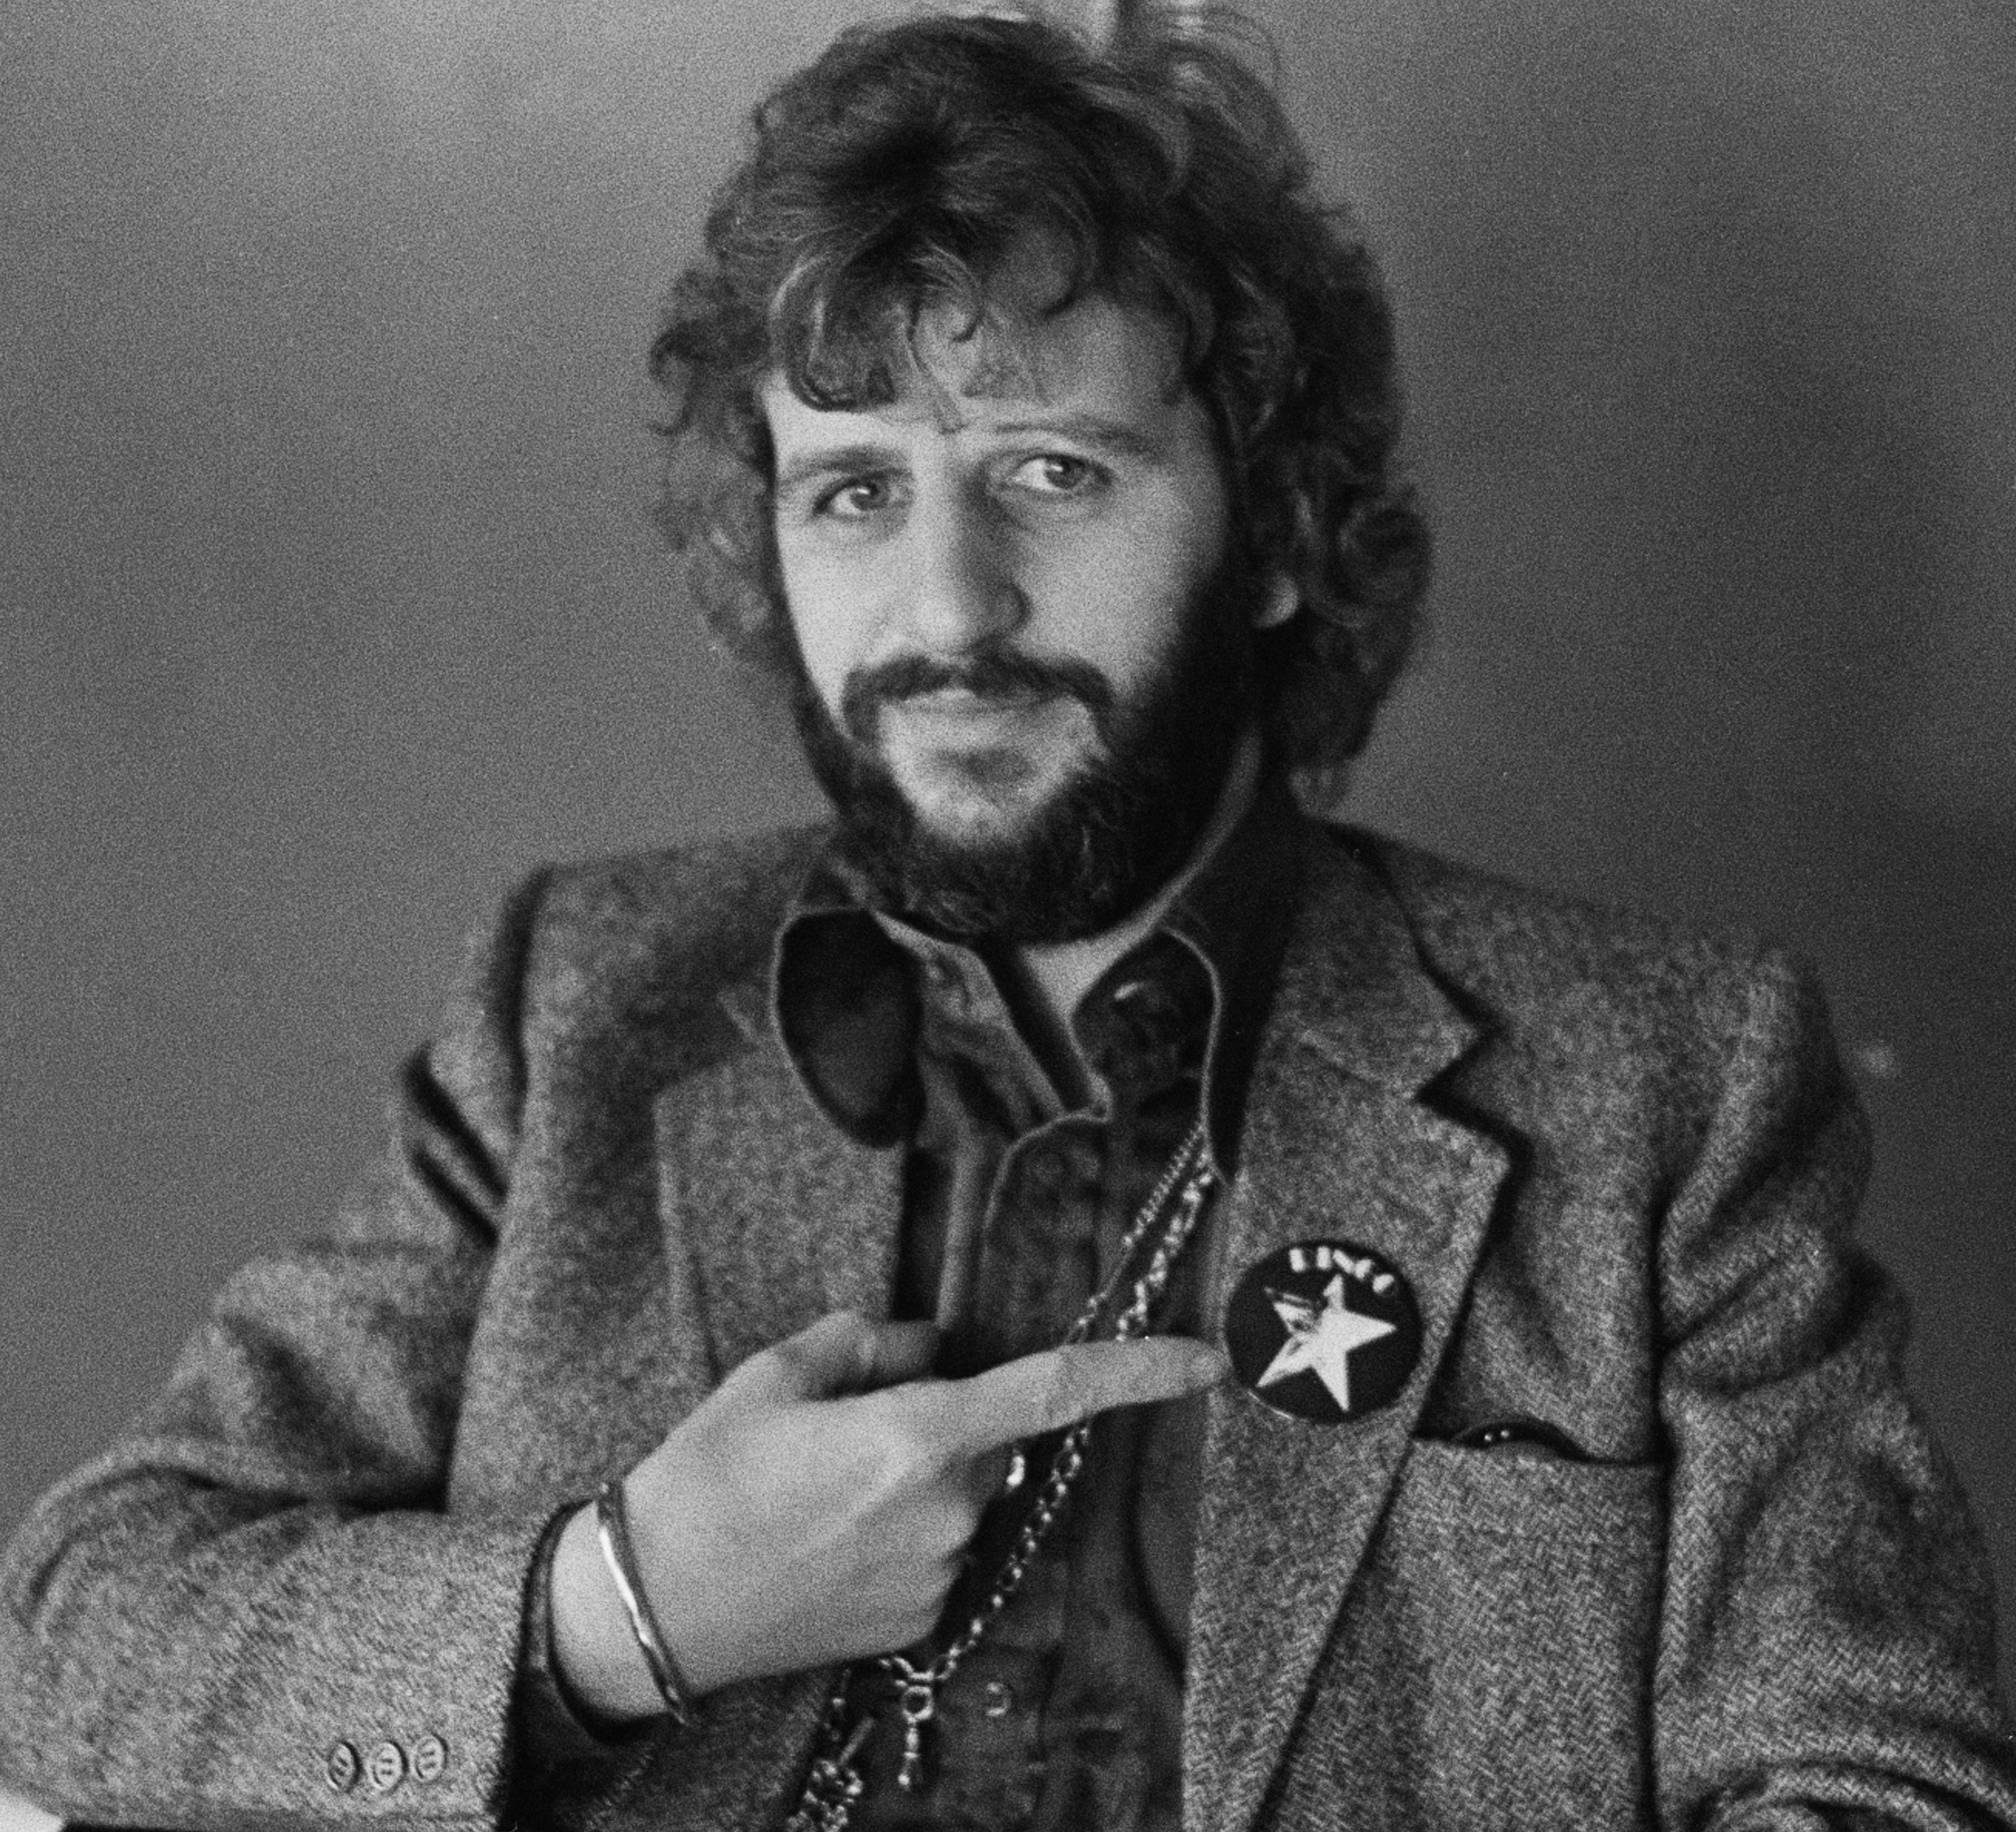 Ringo Starr with a beard during the "You're Sixteen" era